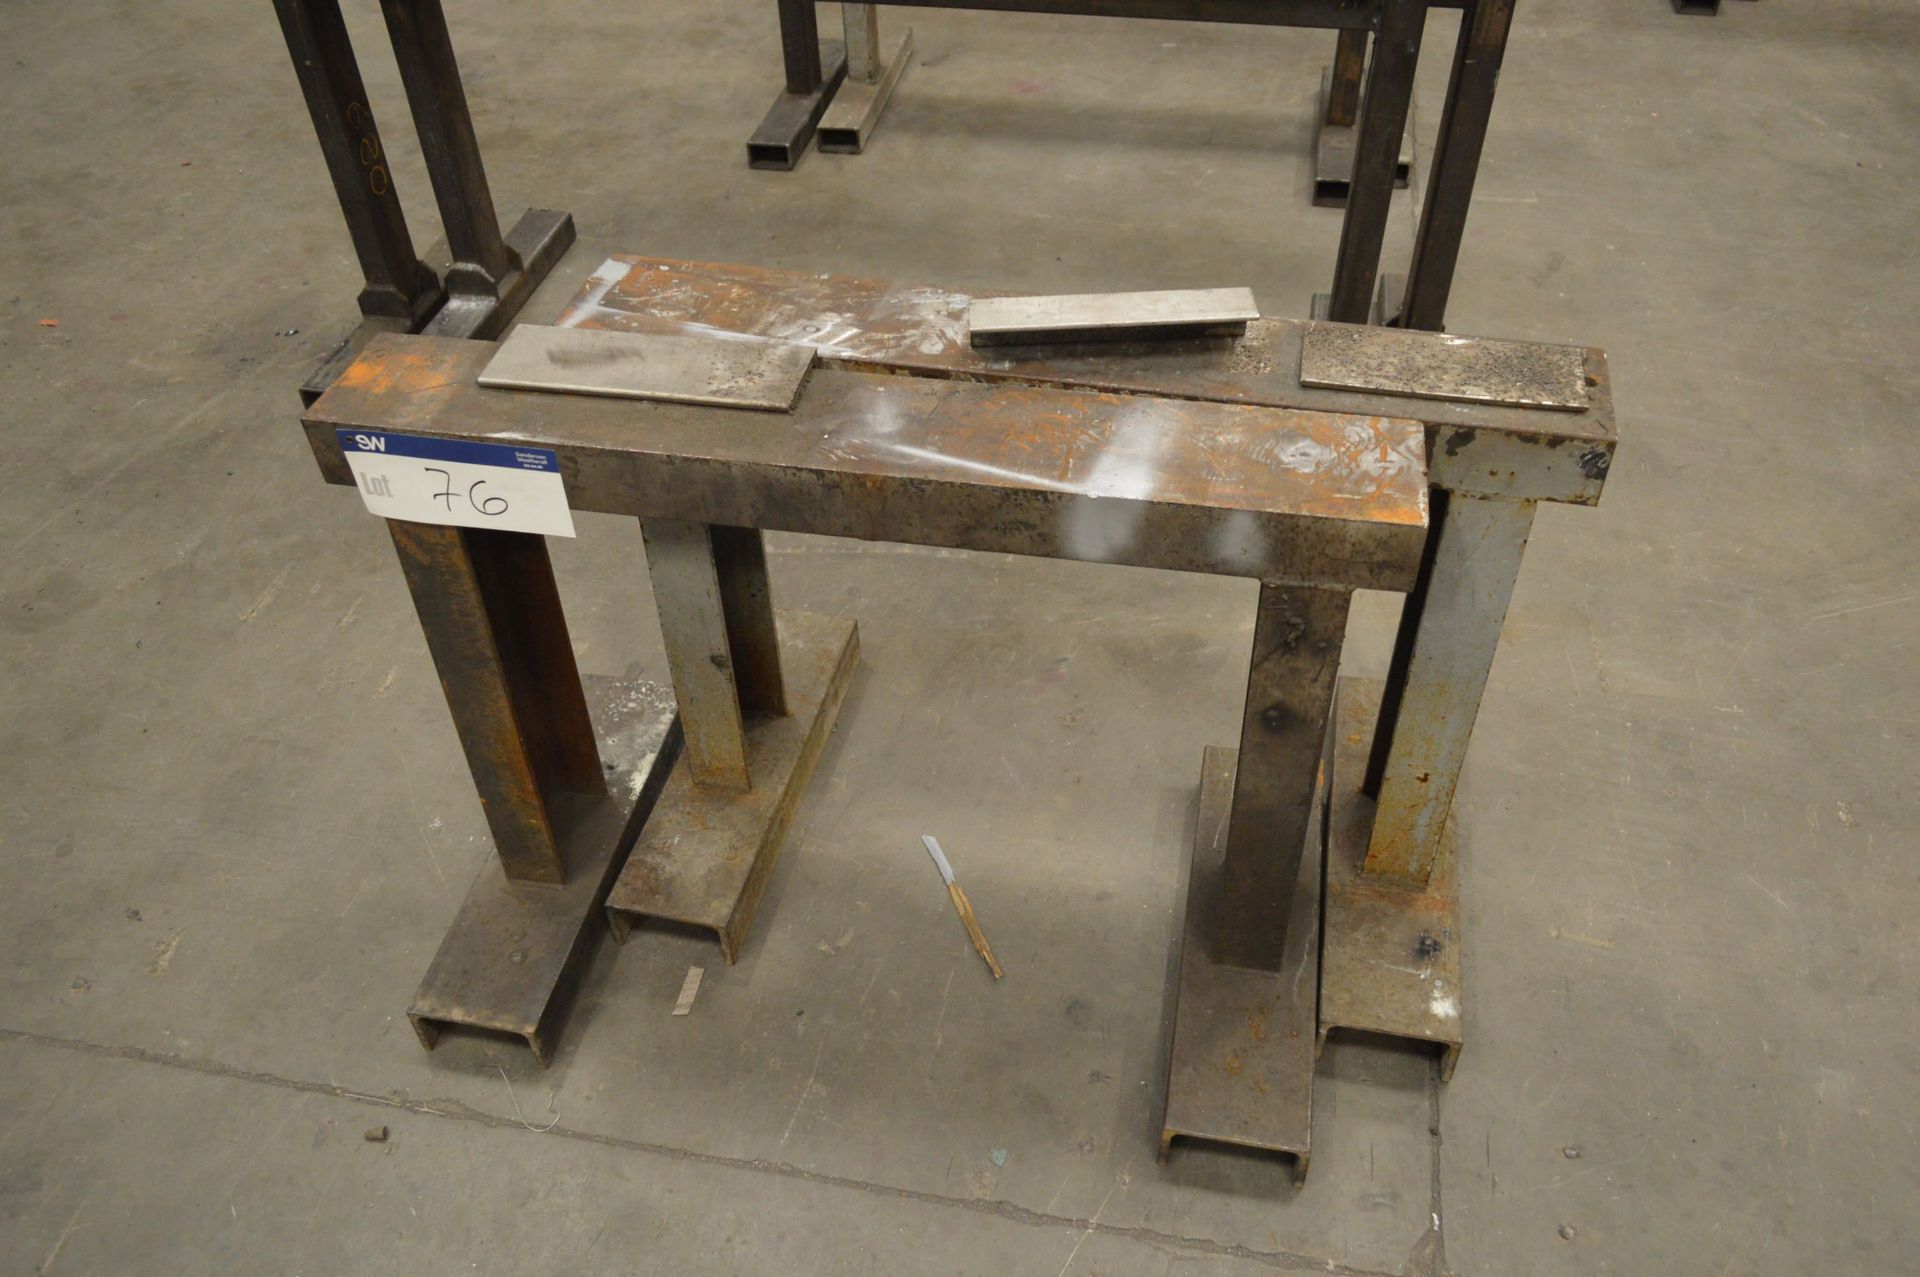 One Pair of Steel Trestles, each approx. 1m x 730mm high